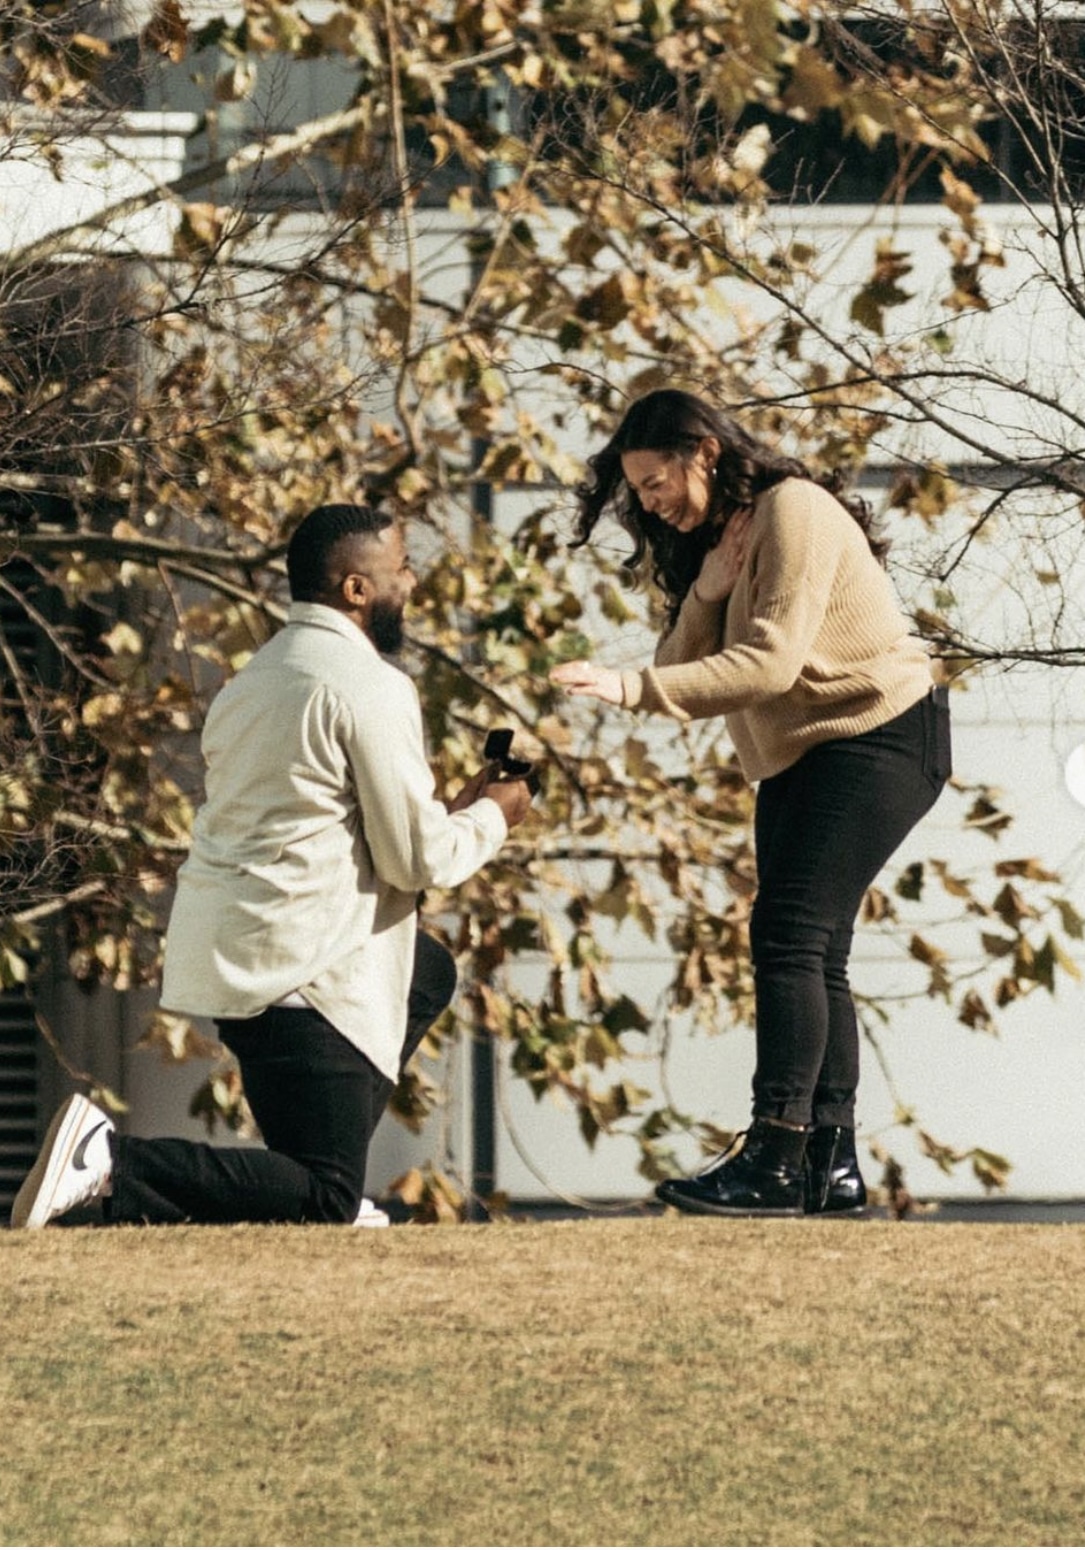 A man gets down on one knee to propose to a woman at Discovery Green in downtown Houston